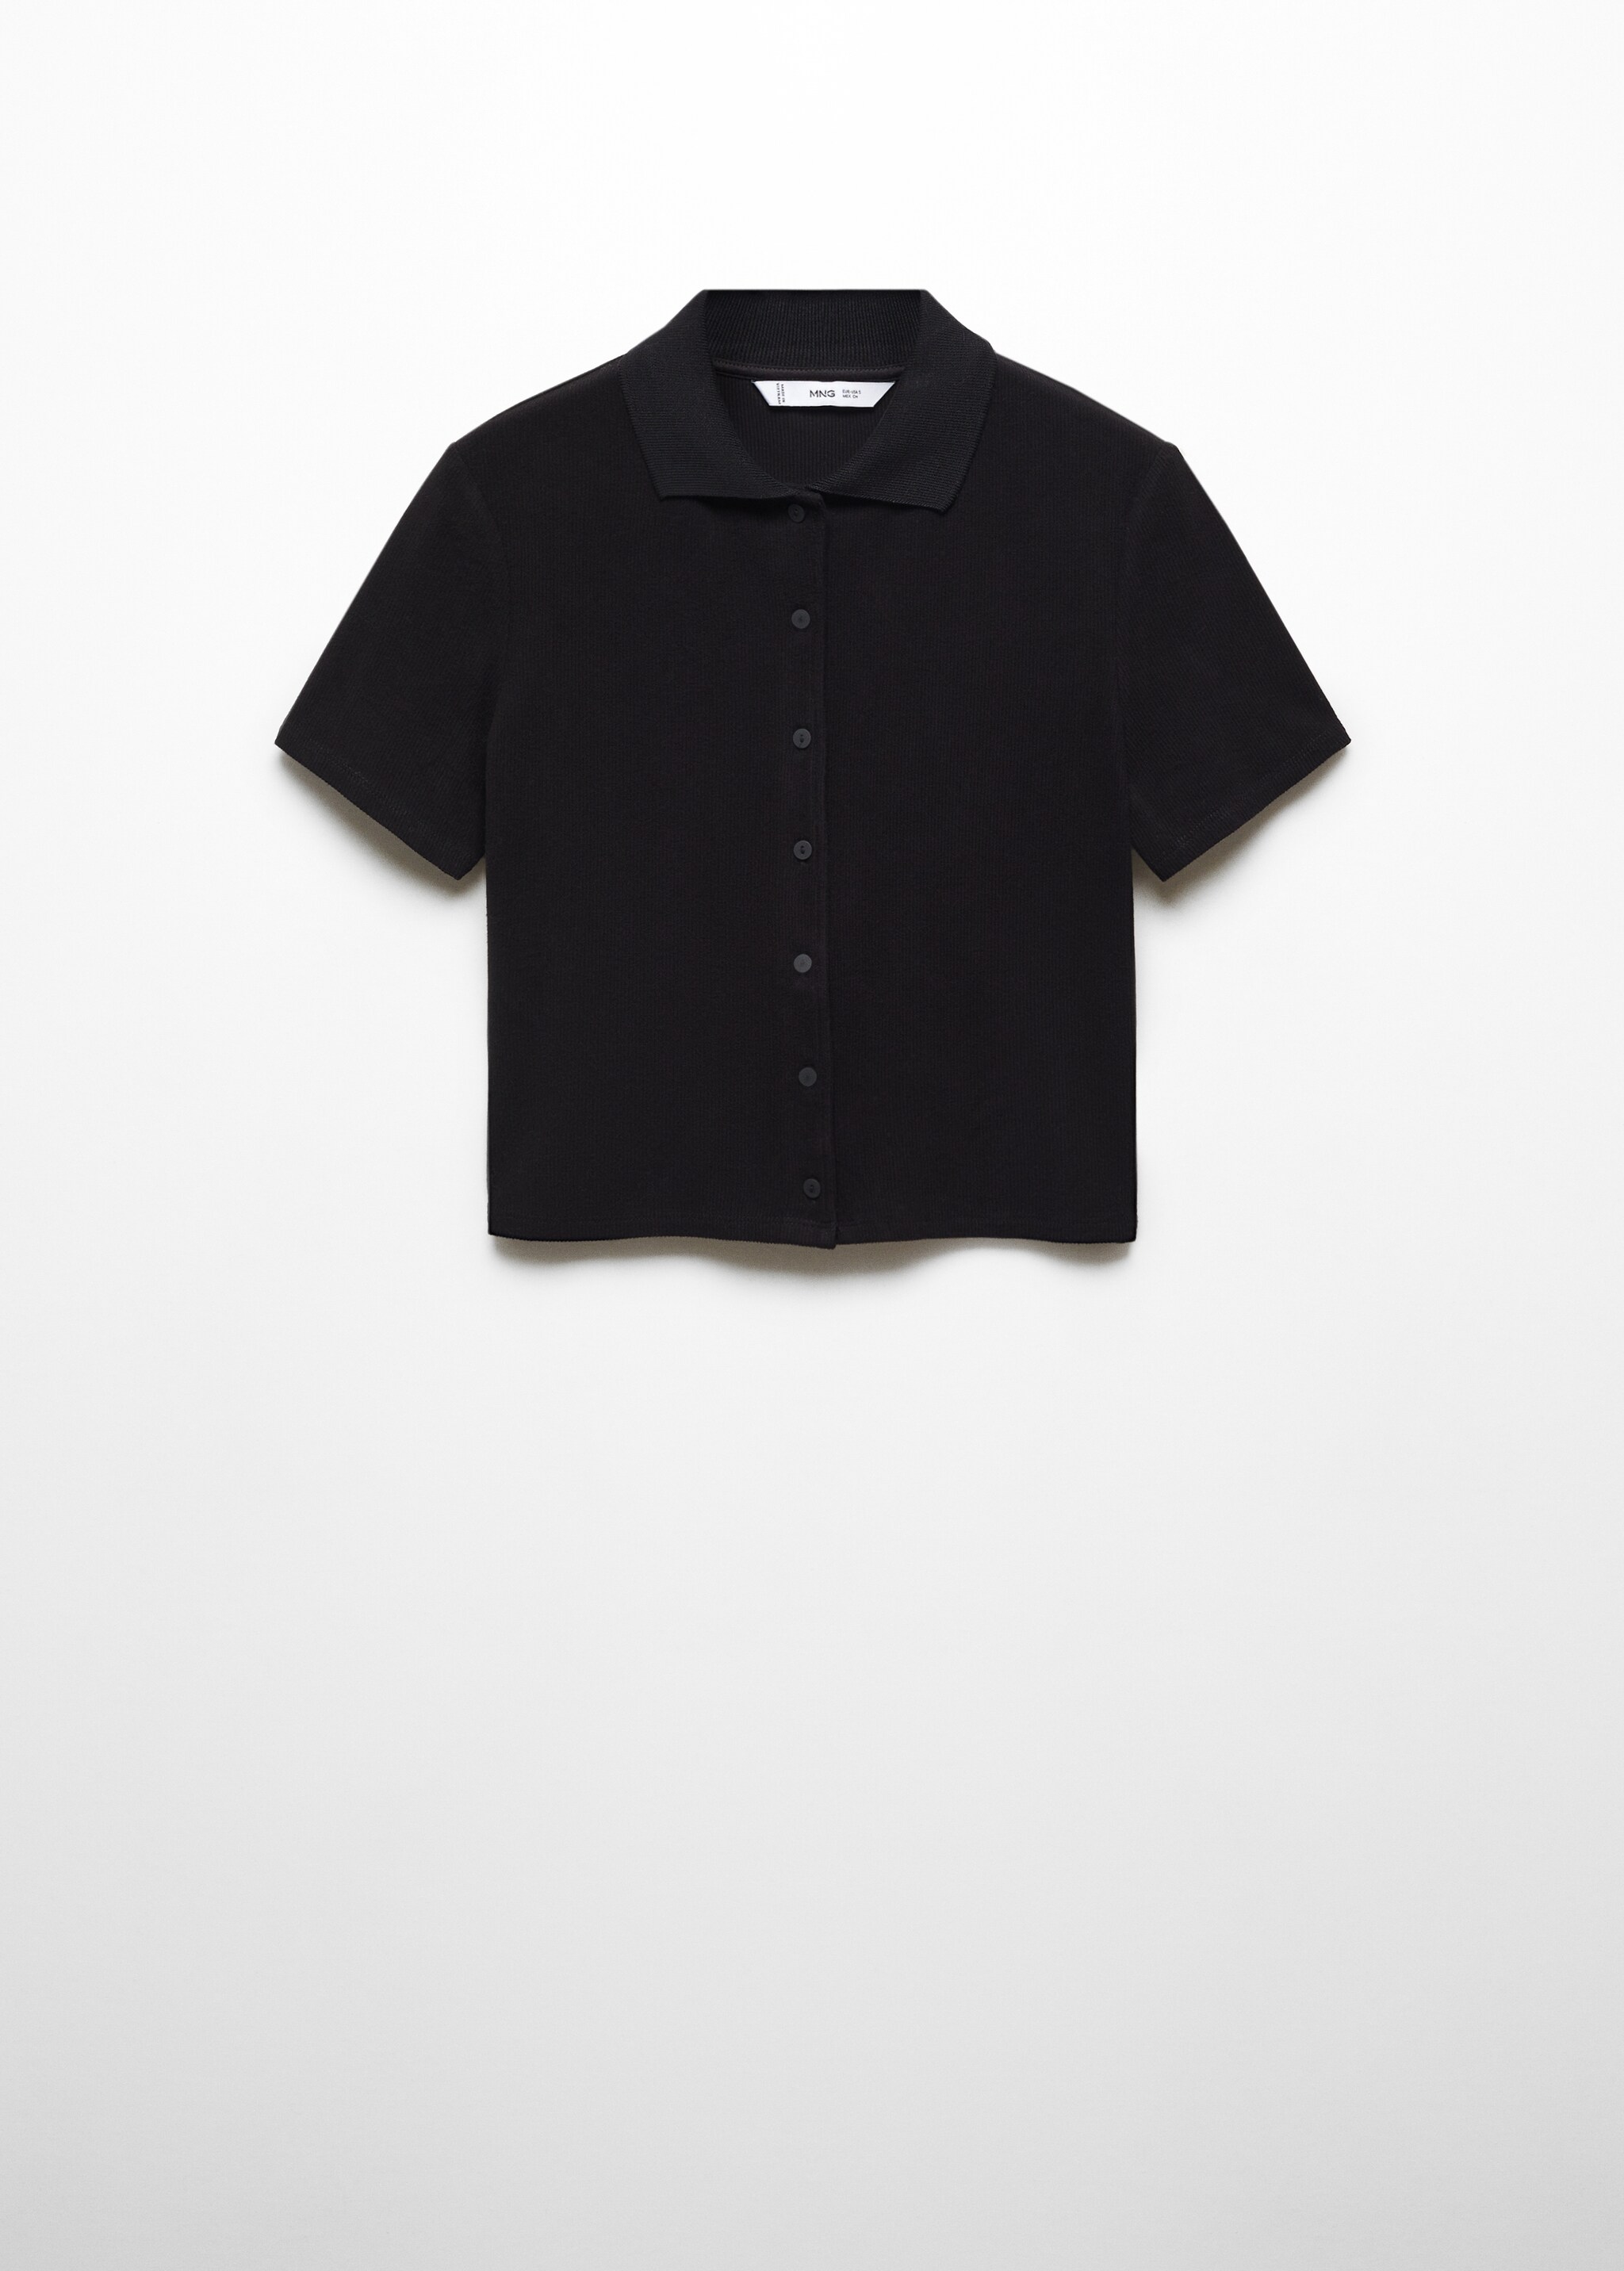 Cropped t-shirt with buttons - Article without model